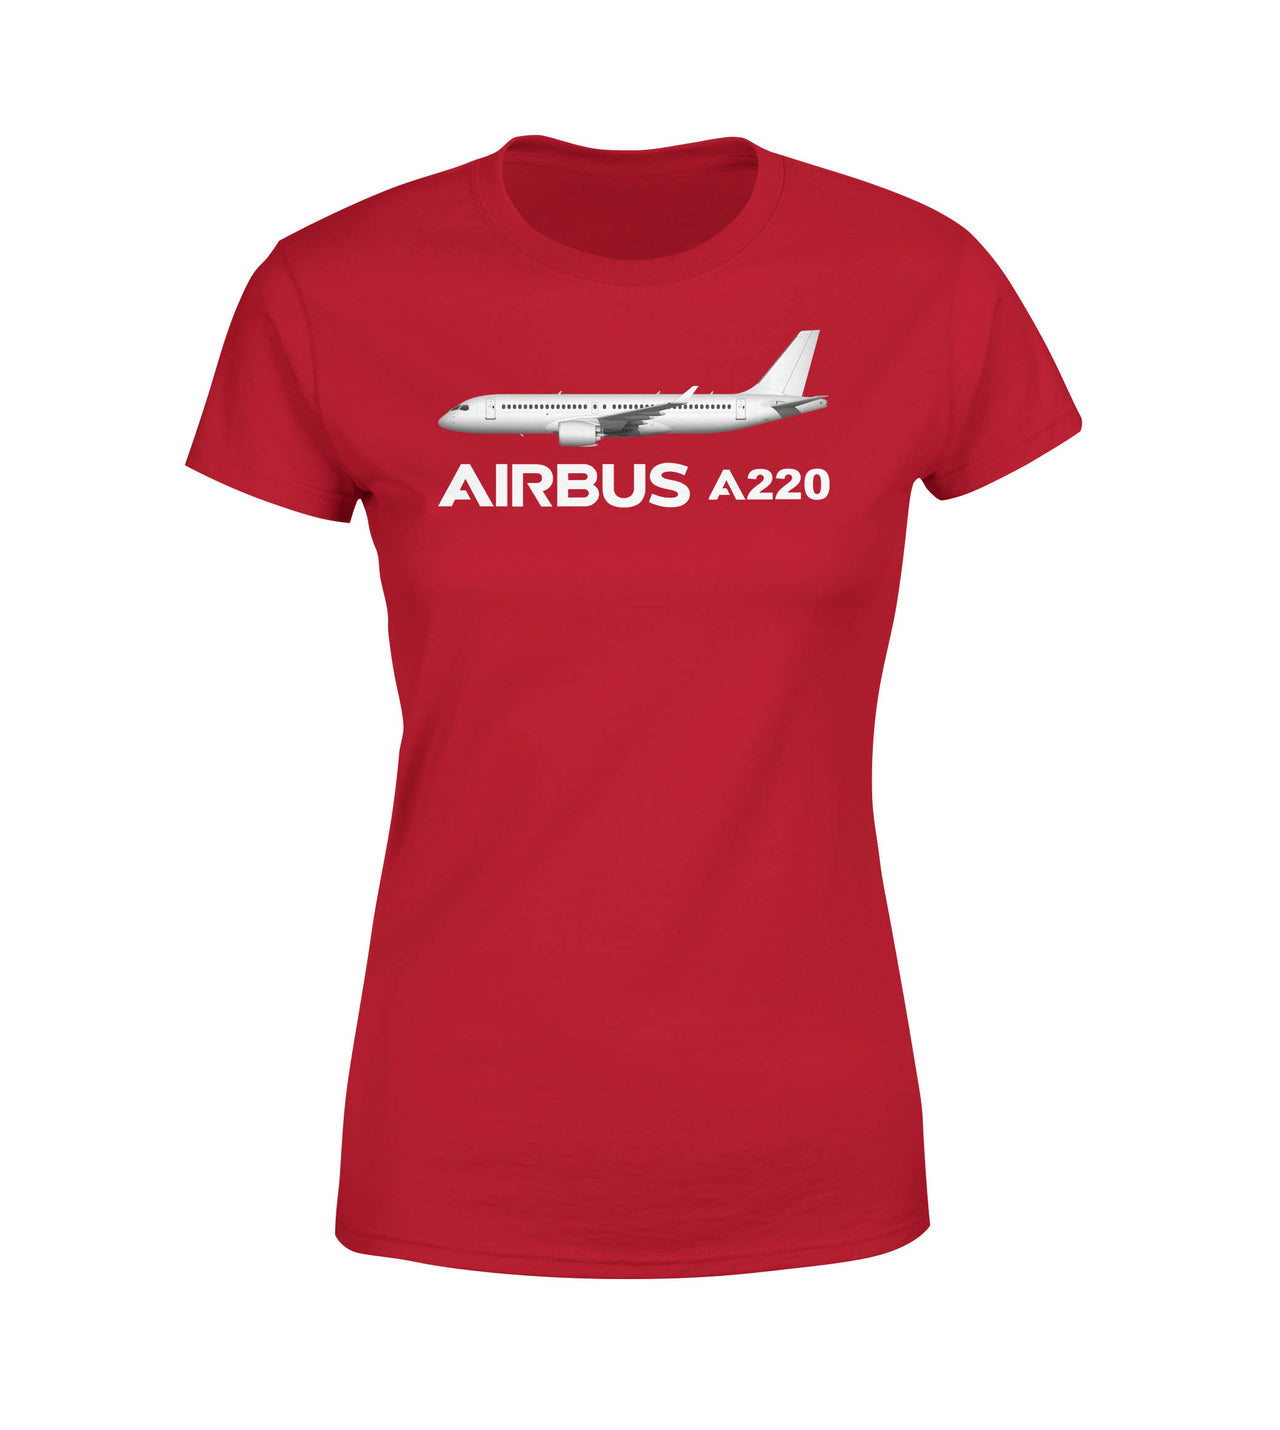 The Airbus A220 Designed Women T-Shirts